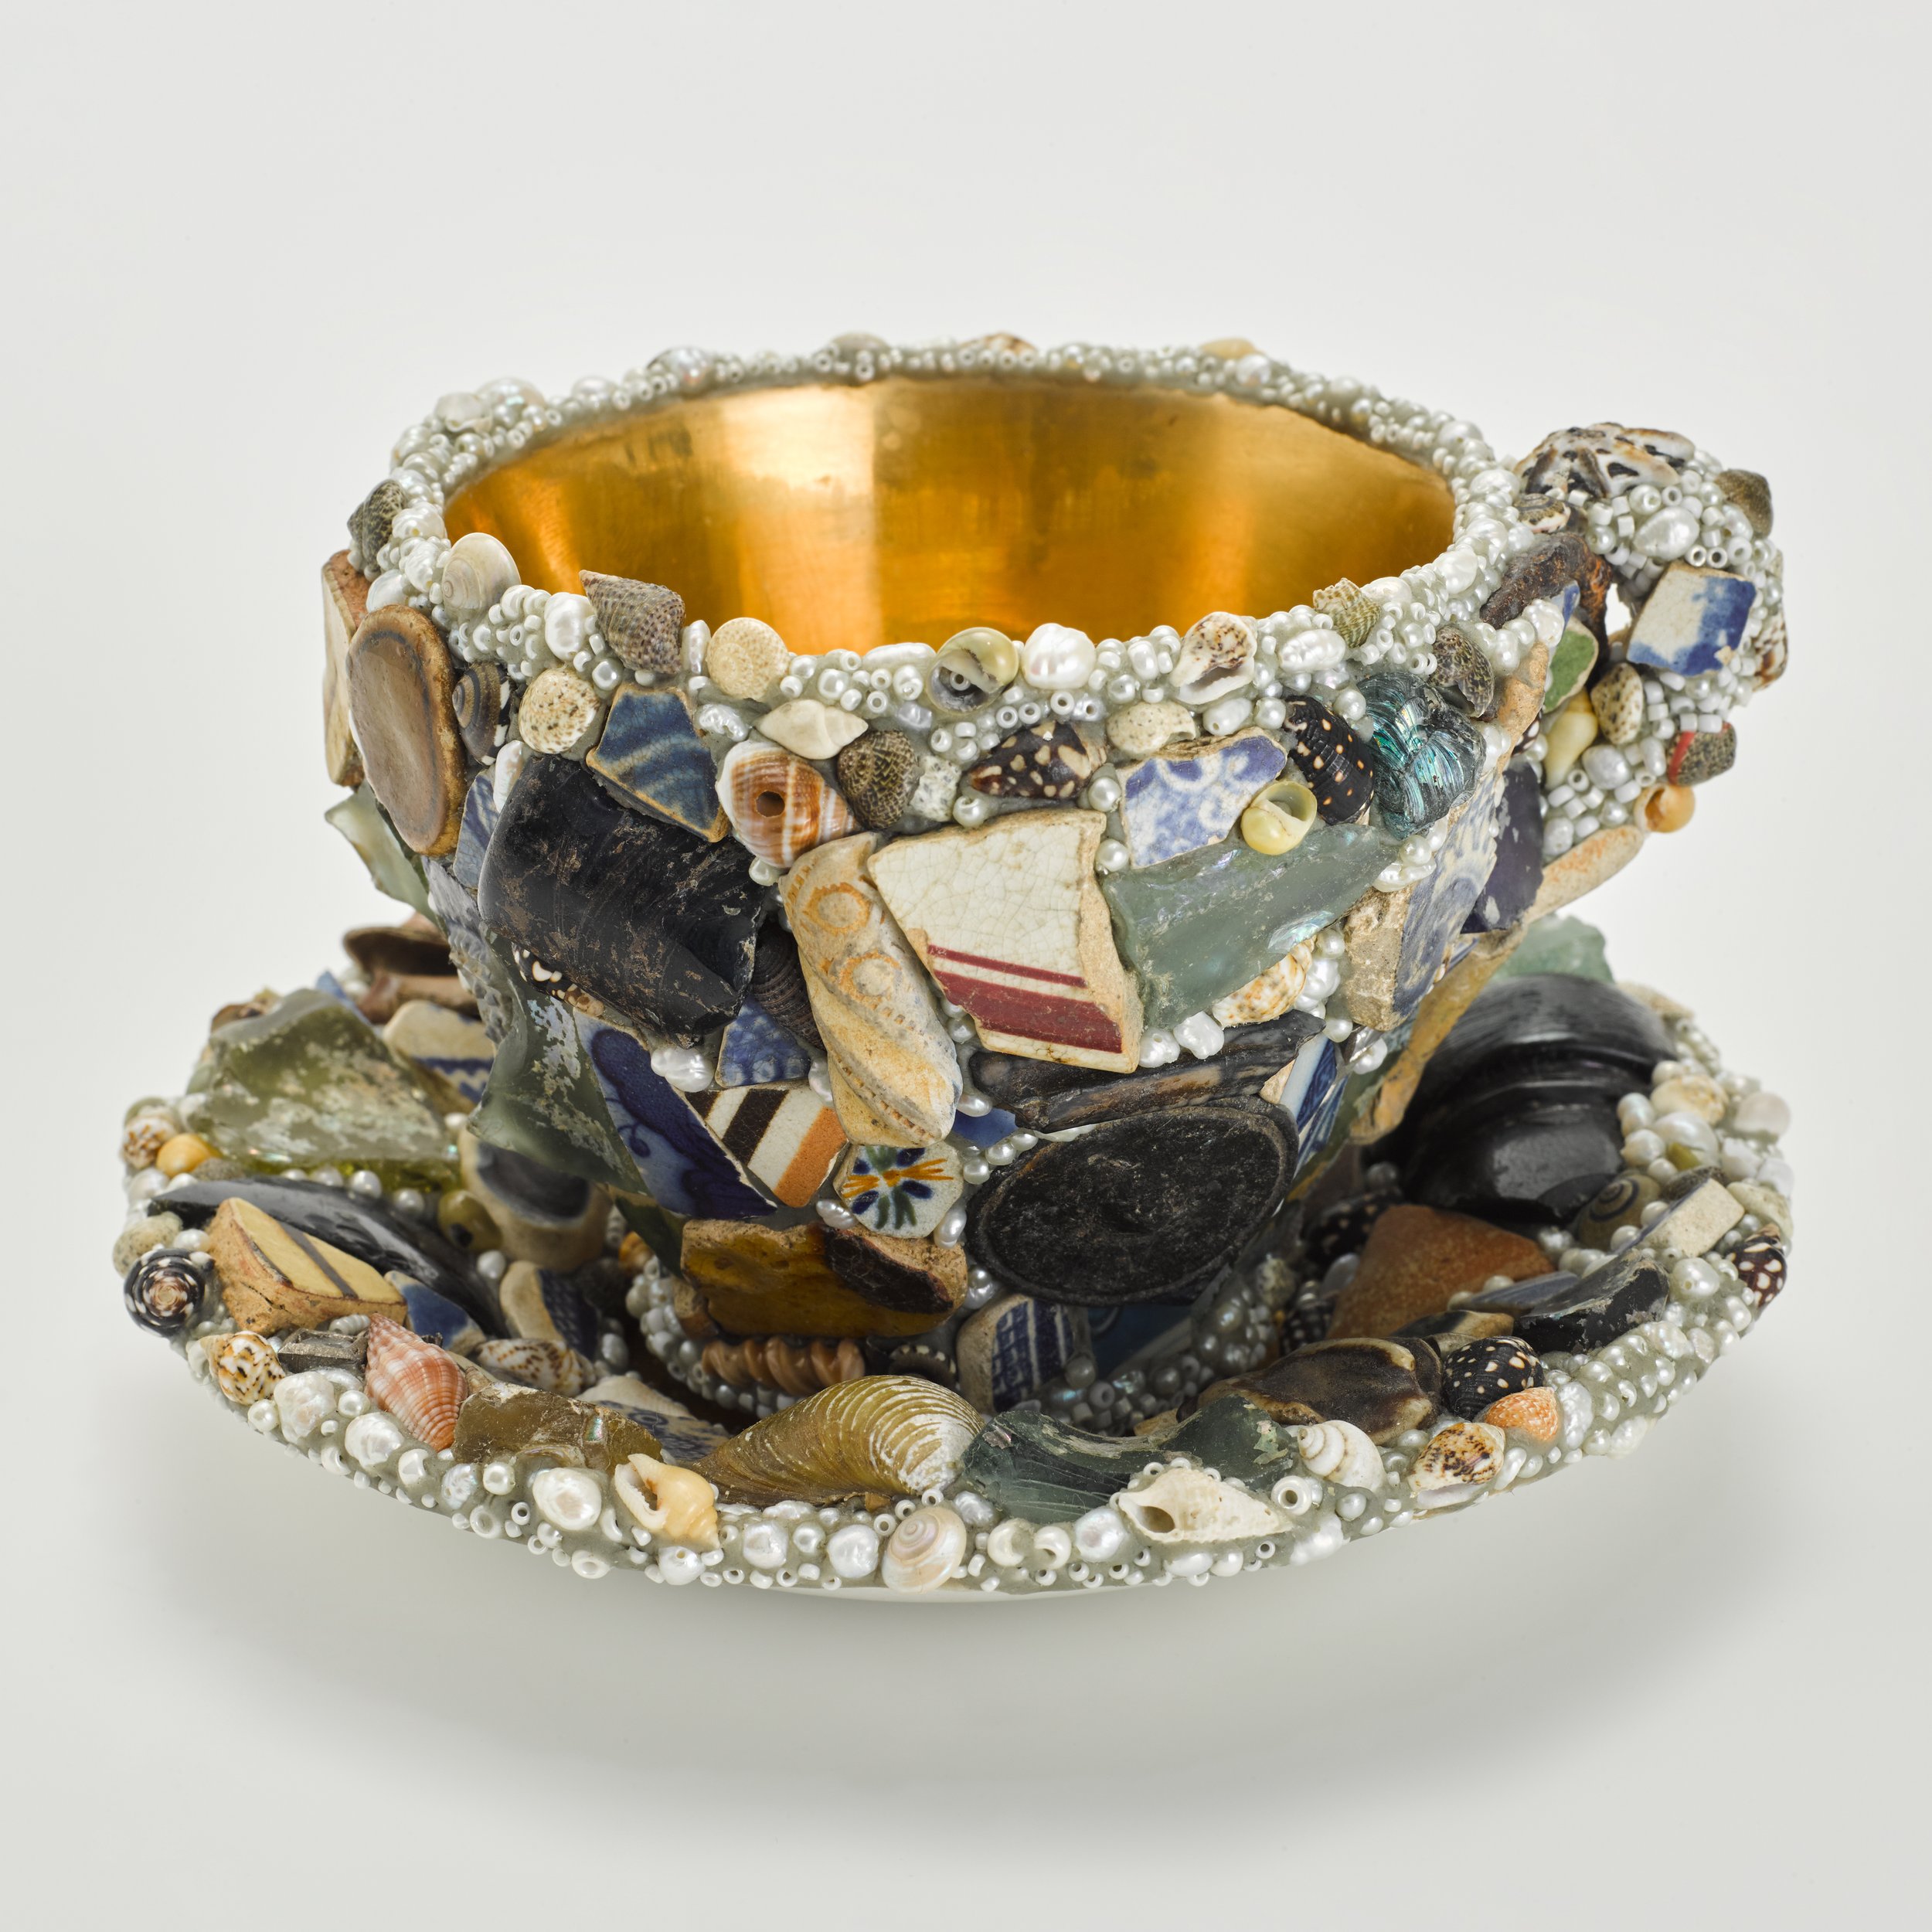 Dredged Cup and saucer_2.jpg